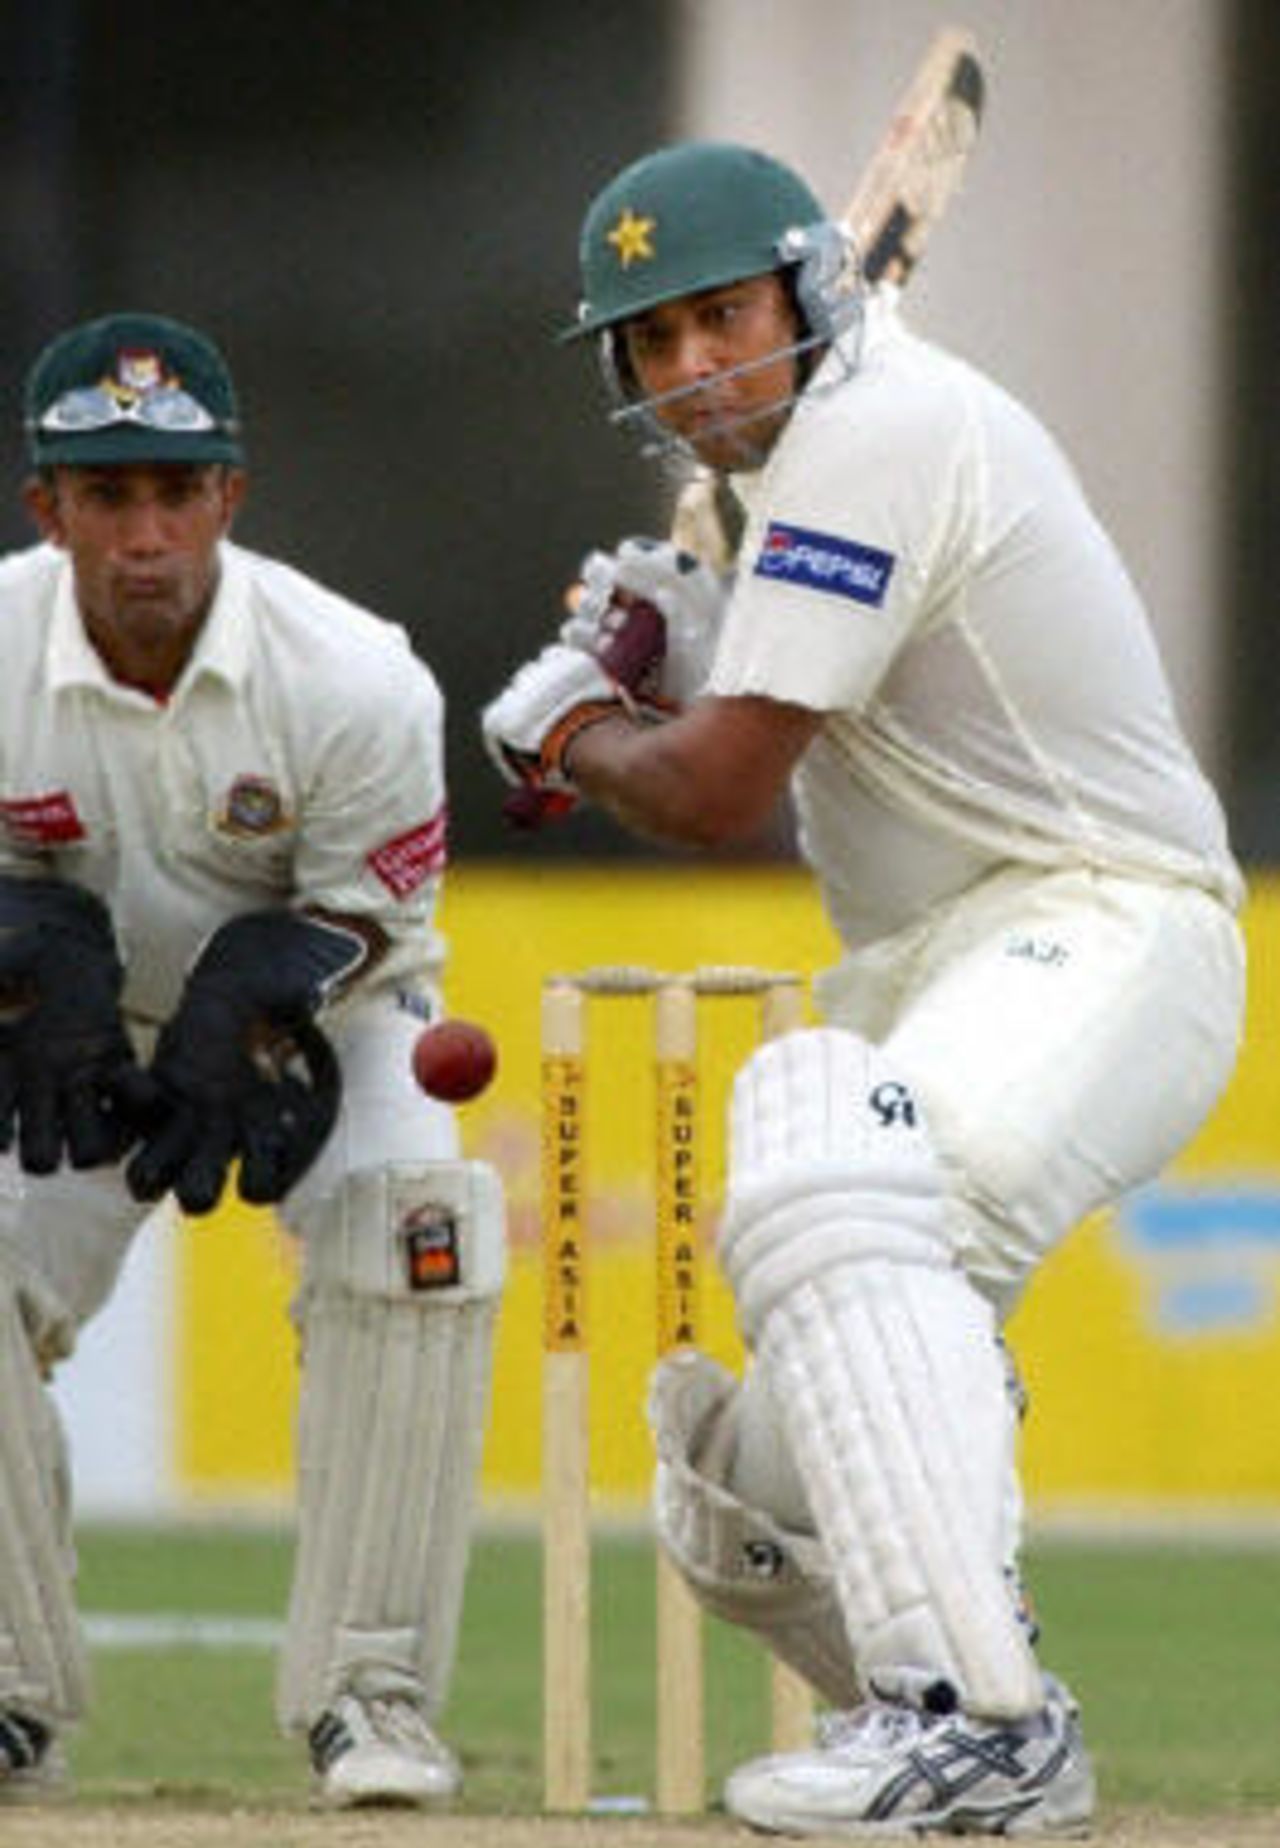 Inzamam-ul-Haq hits another four as he battled on to 138* for an unlikely win for Pakistan as Khaled Mashud looks on, Pakistan v Bangladesh, 3rd Test, Multan, September 6, 2003.